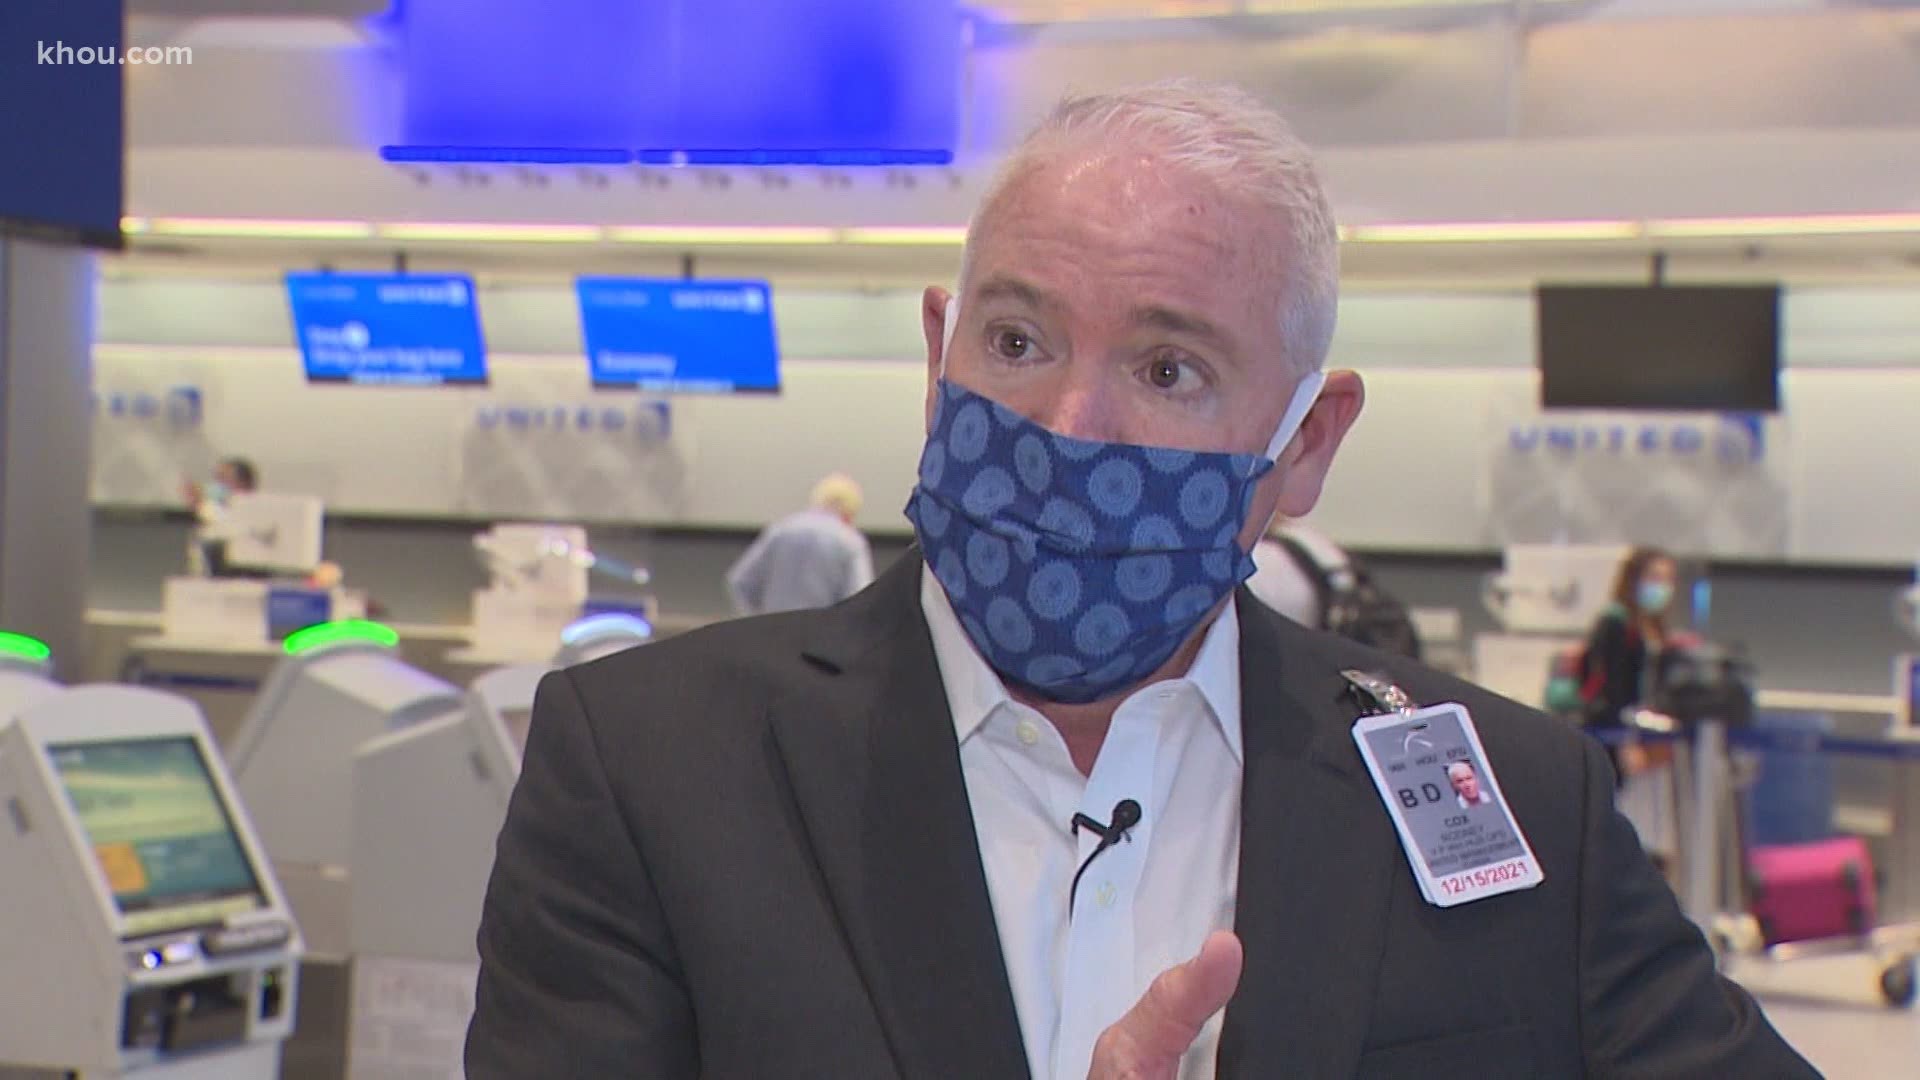 Before you book that next trip this summer, check out how United Airlines plans to keep travelers safe at the airport and in the air during a pandemic.